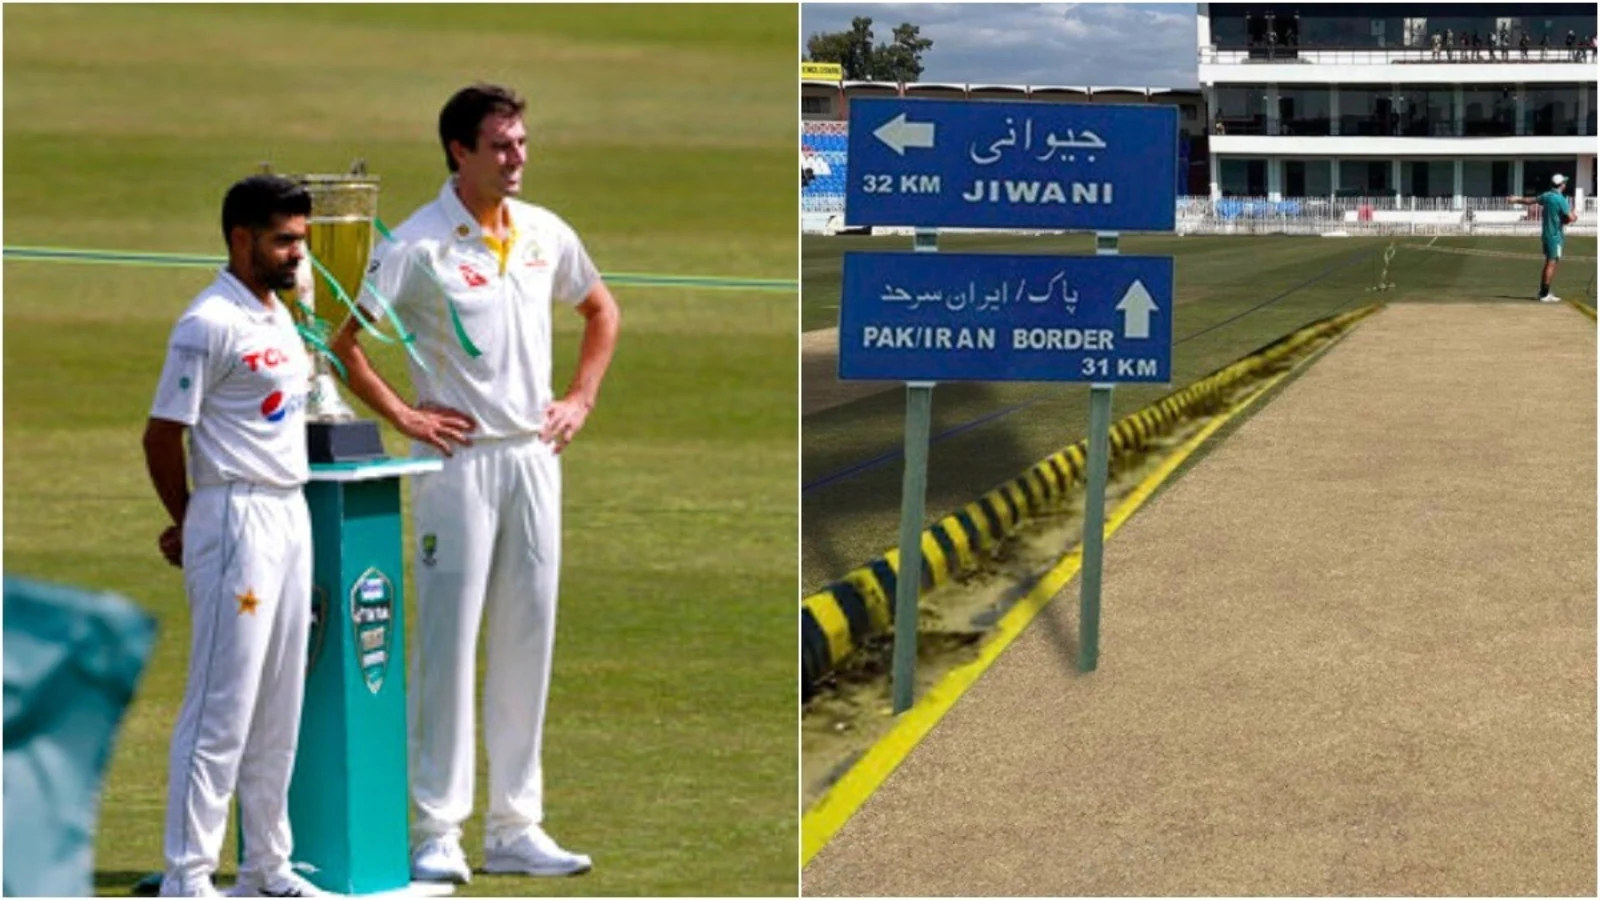 Rawalpindi's pitch got a demerit point which reversed following PCB's appeal